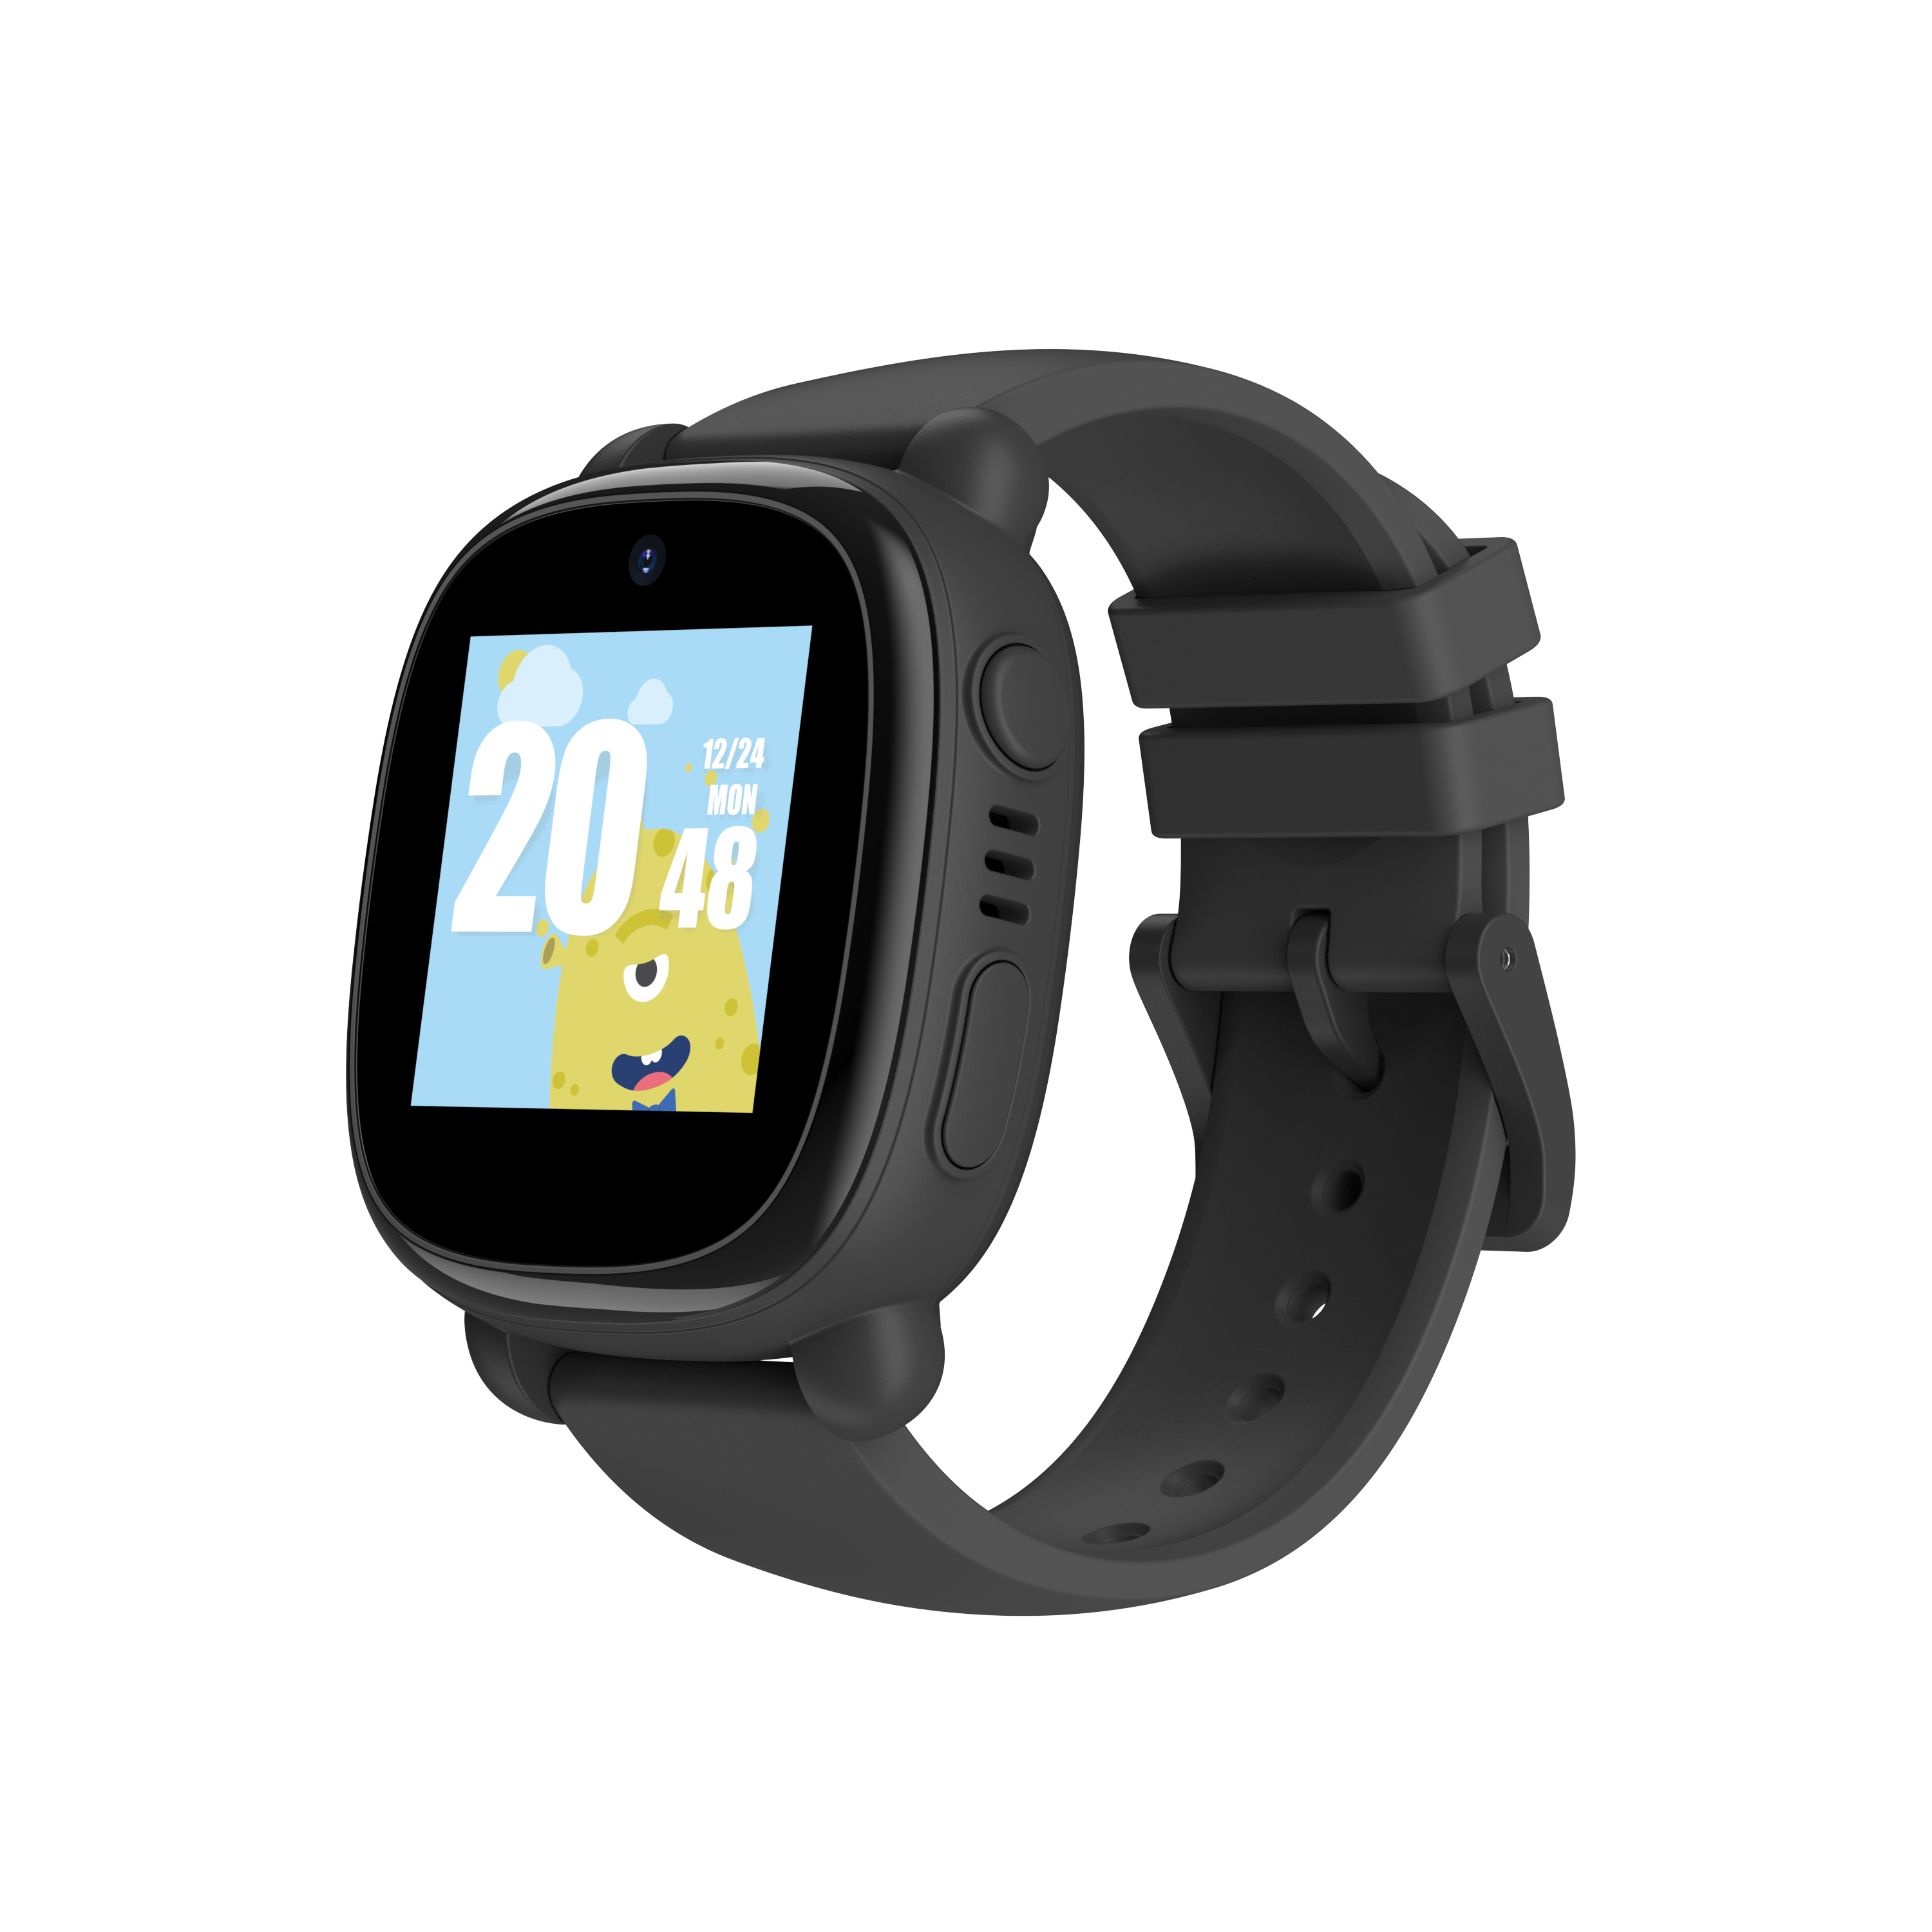 WatchOut Duo Kids Smart Watch with GPS Tracking, Video Call, SOS and Dual Camera (Black Jack)